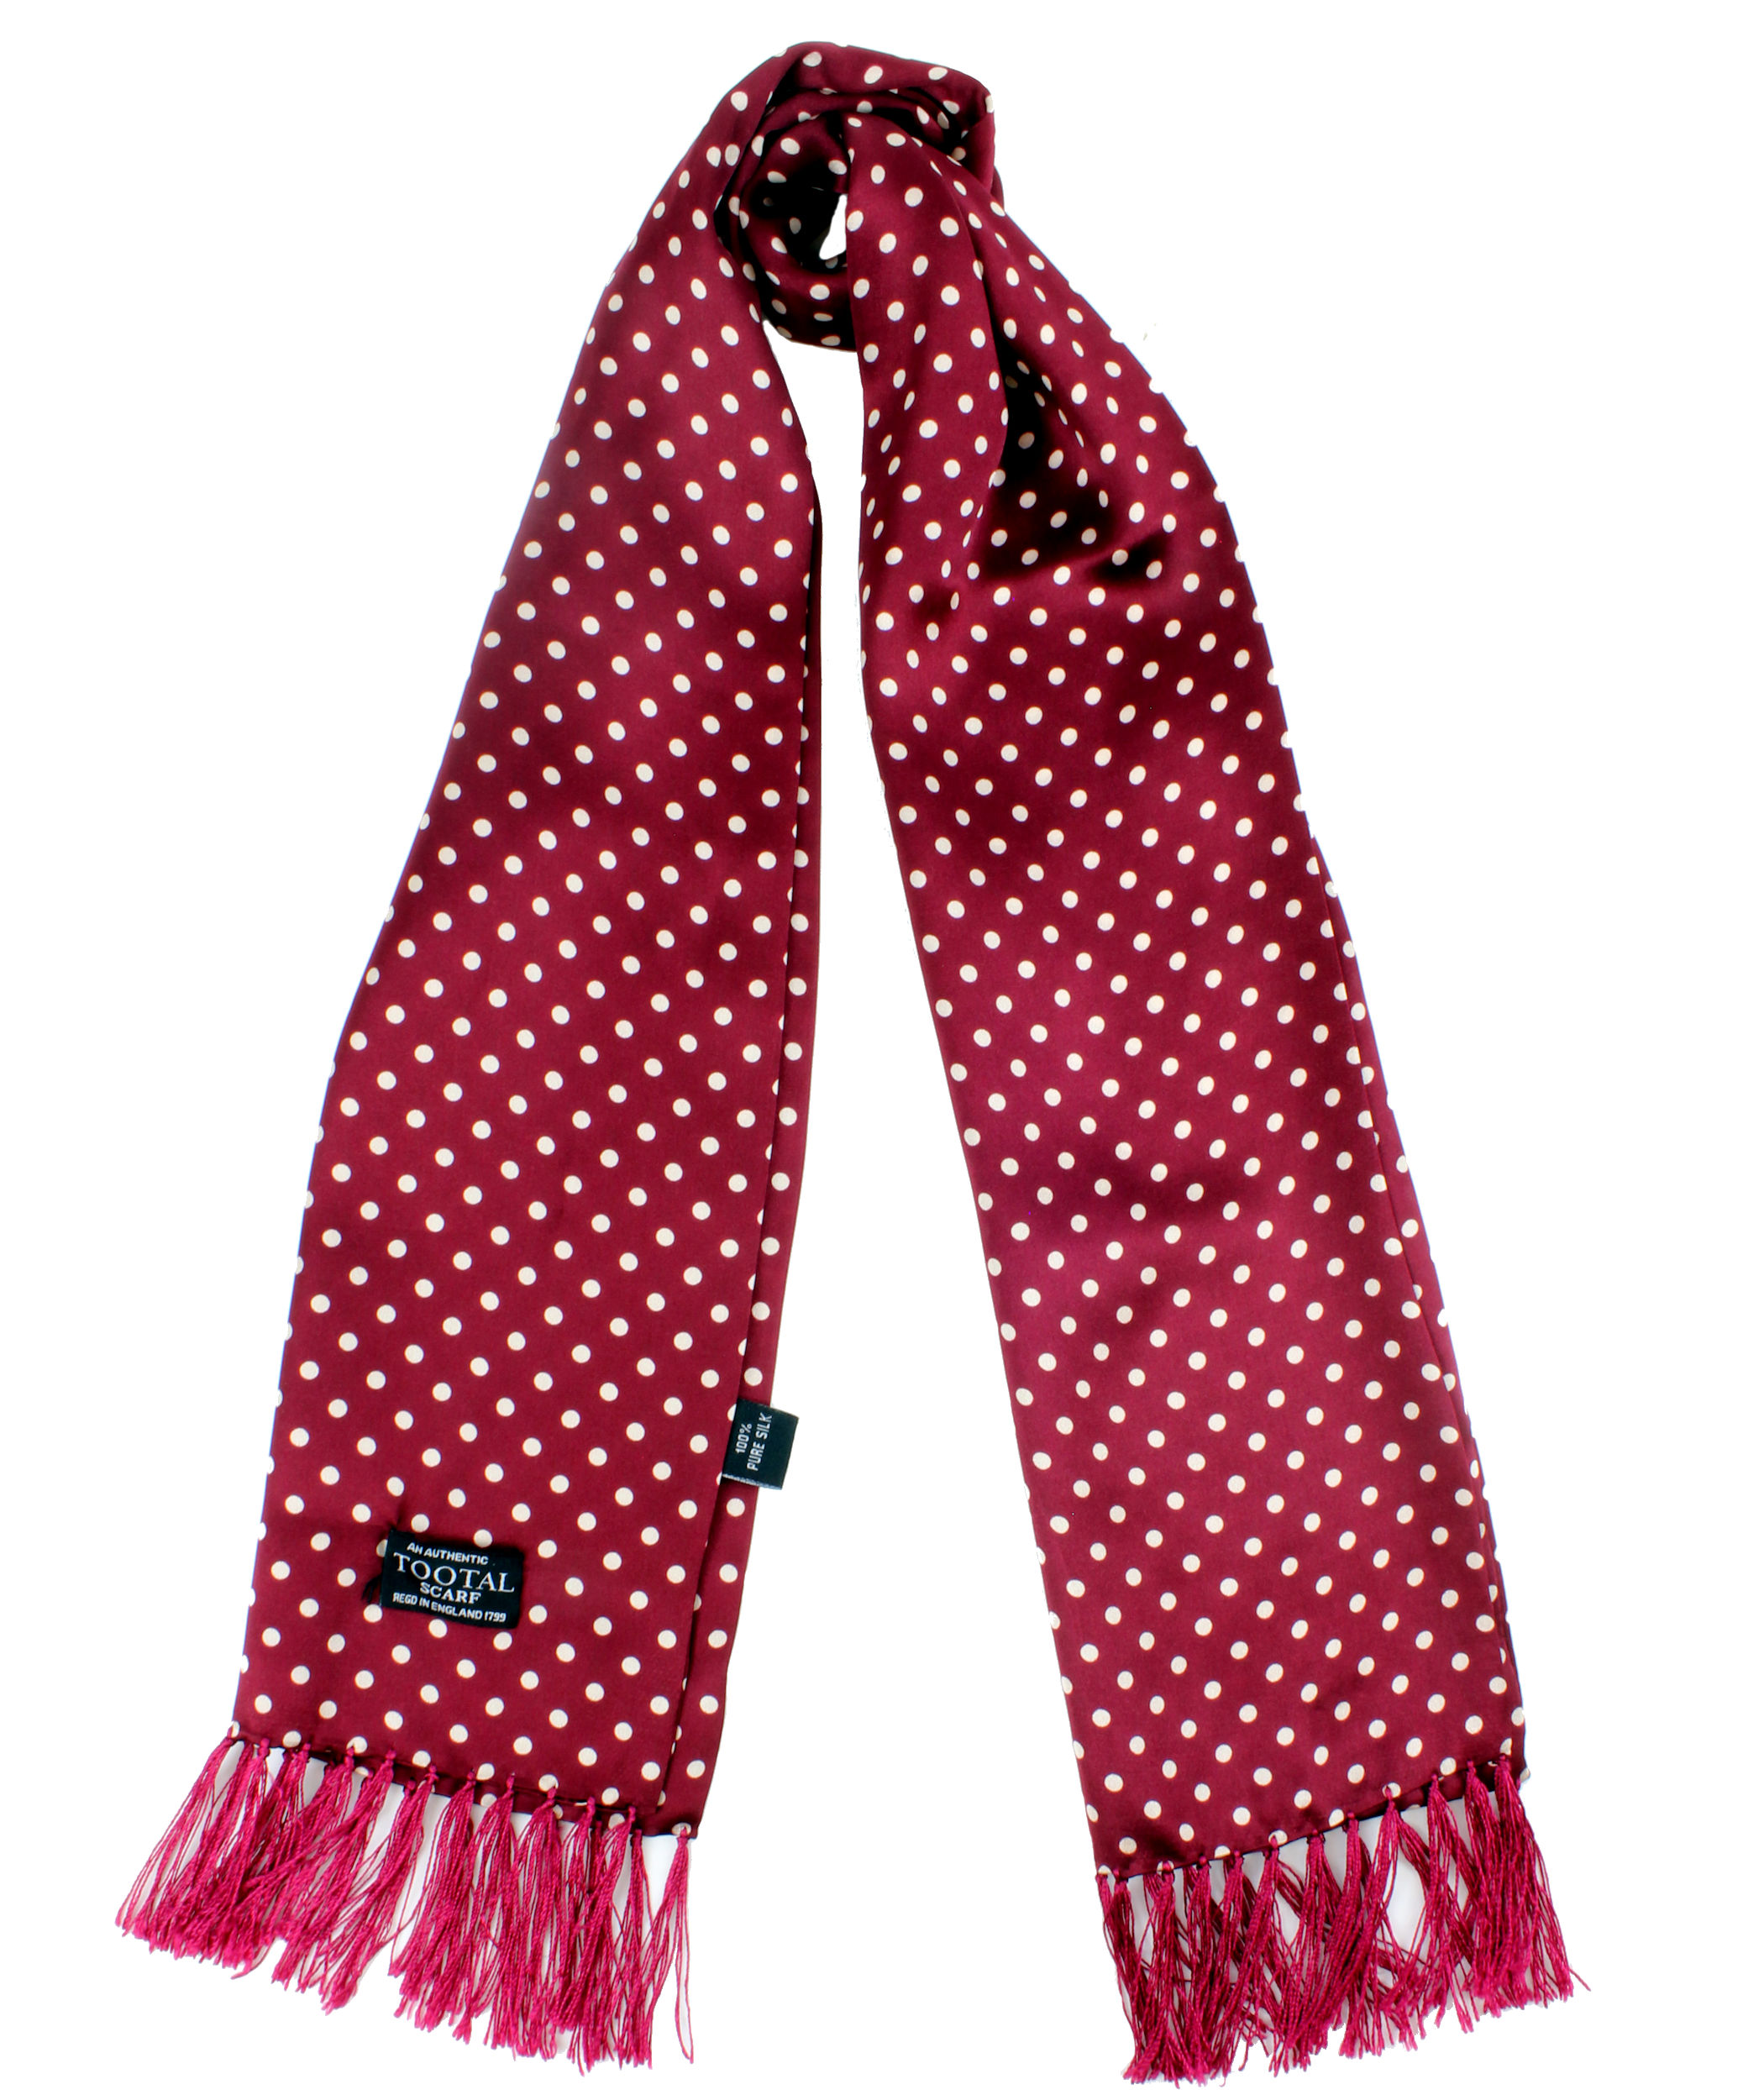 Burgundy Silk Scarf with White Dots